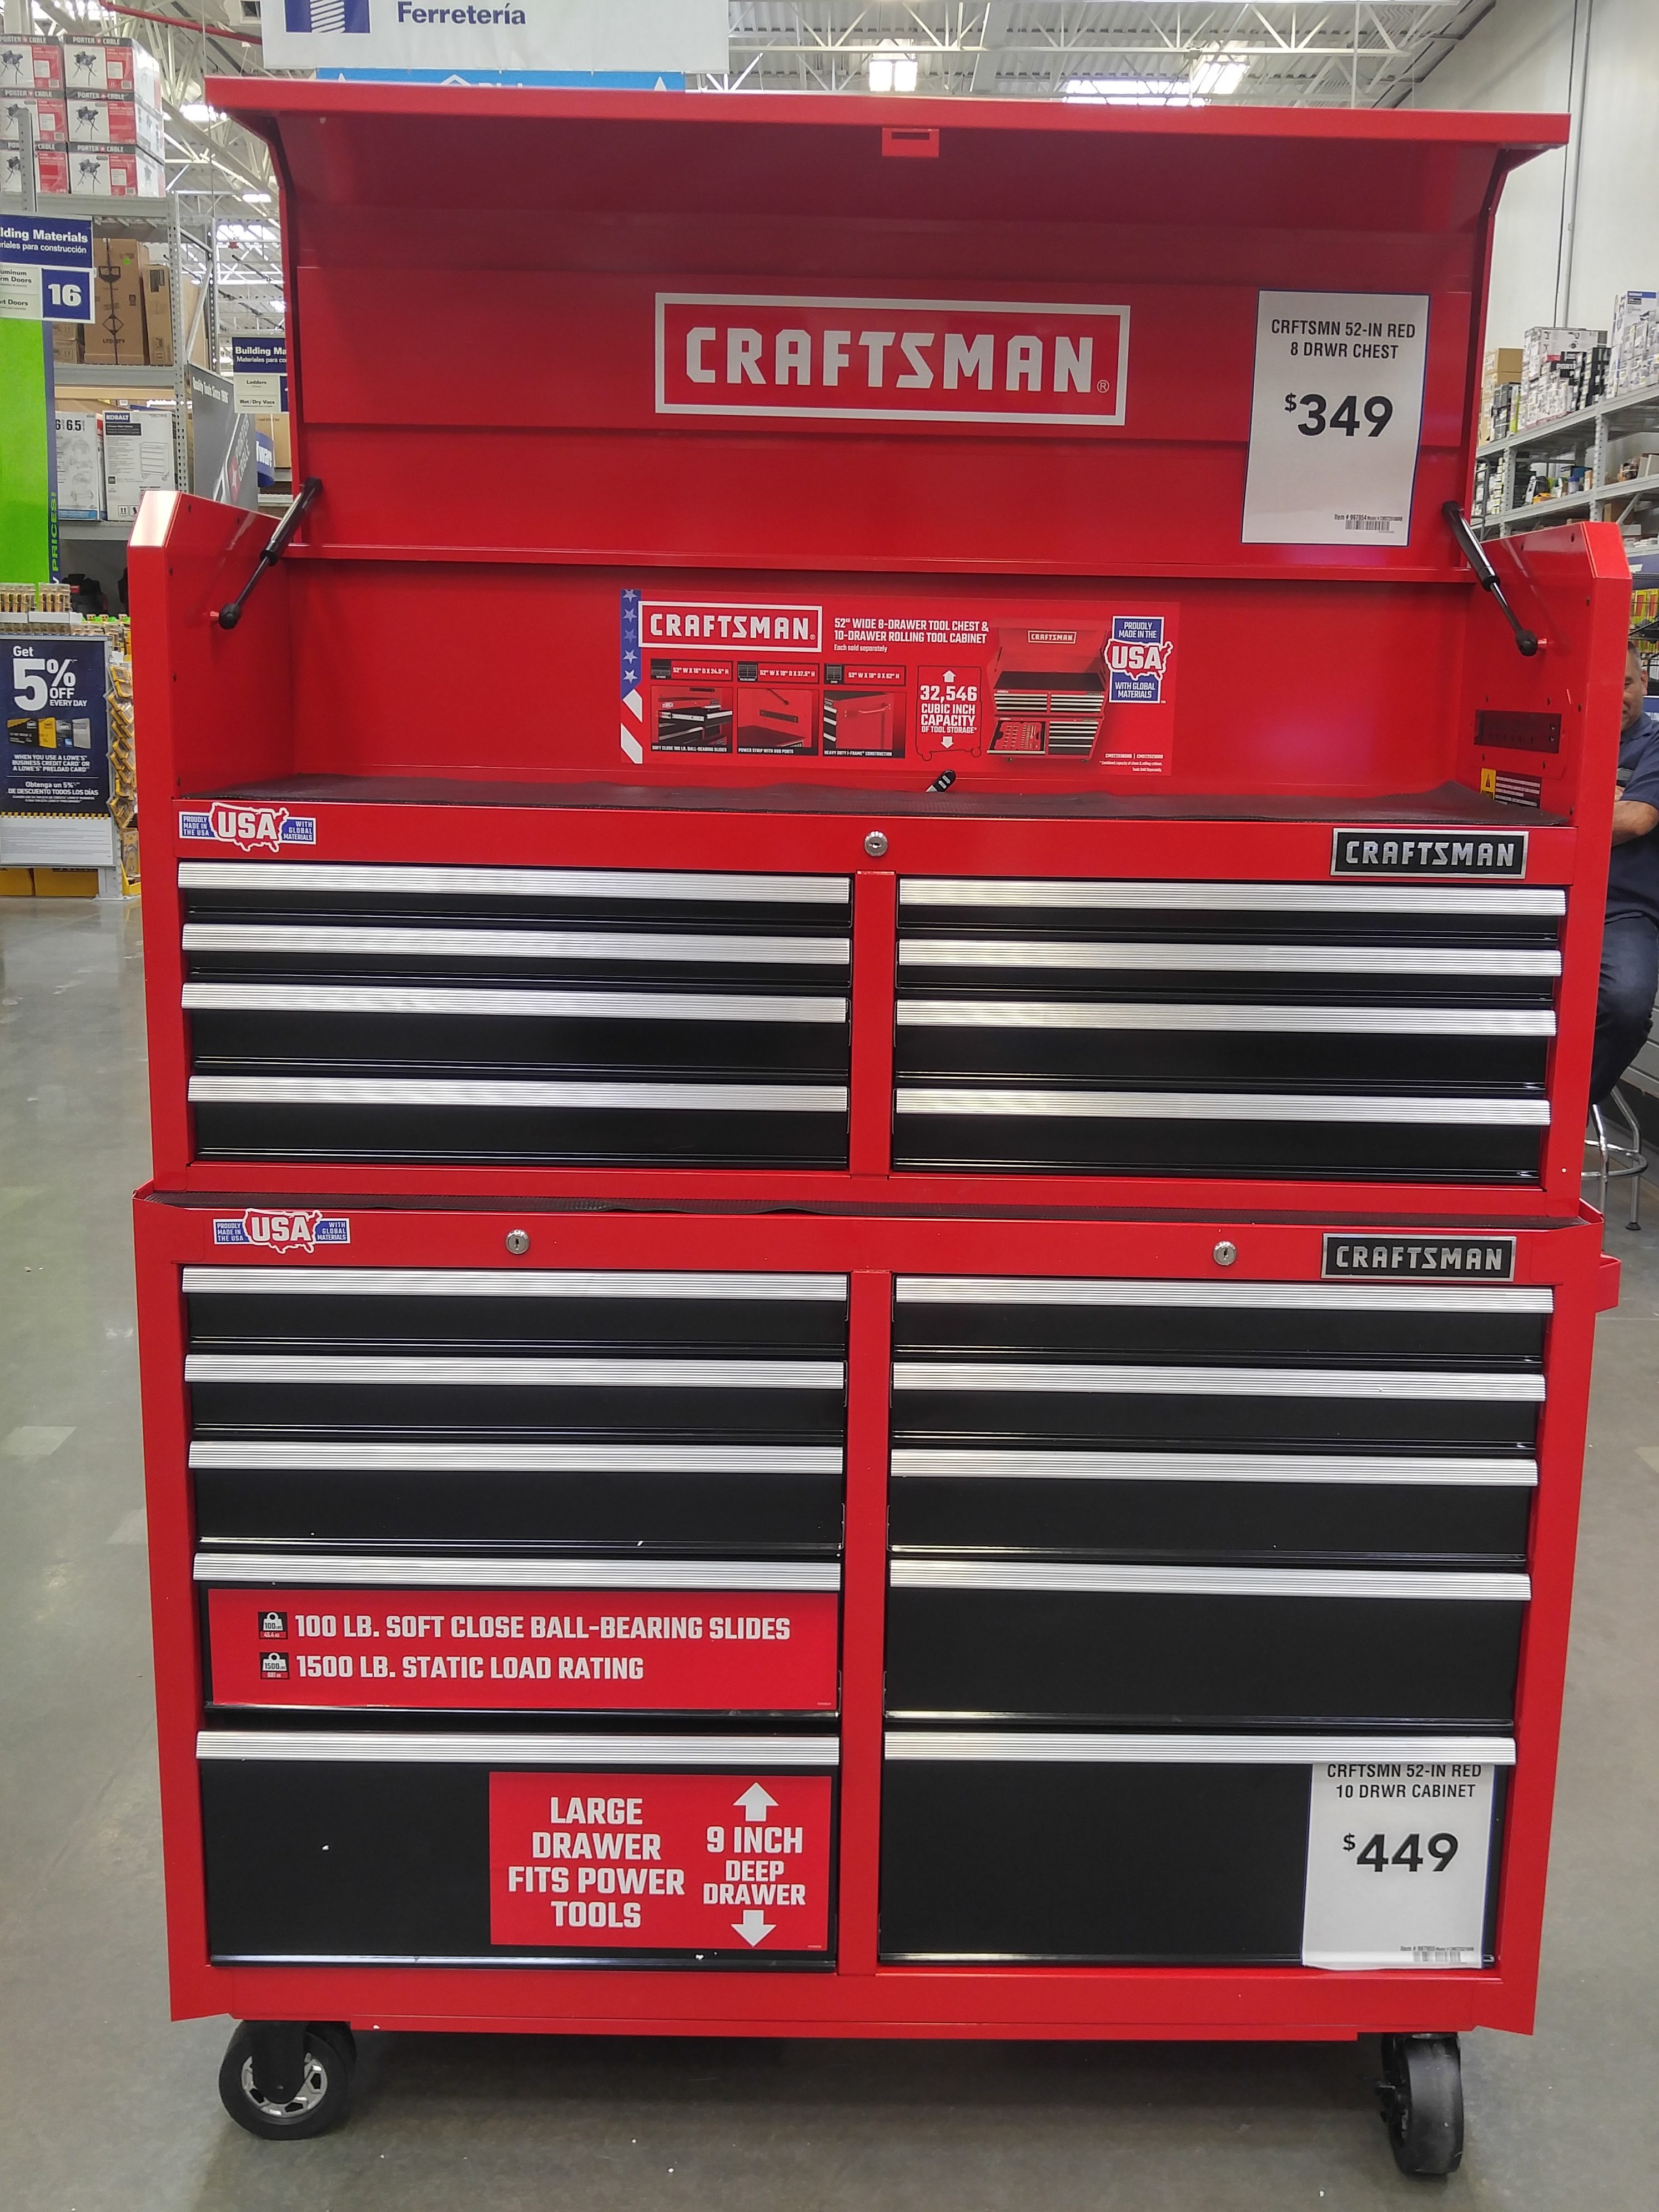 Found Craftsman Tool Box Flashlights At Lowes During Recent Trip